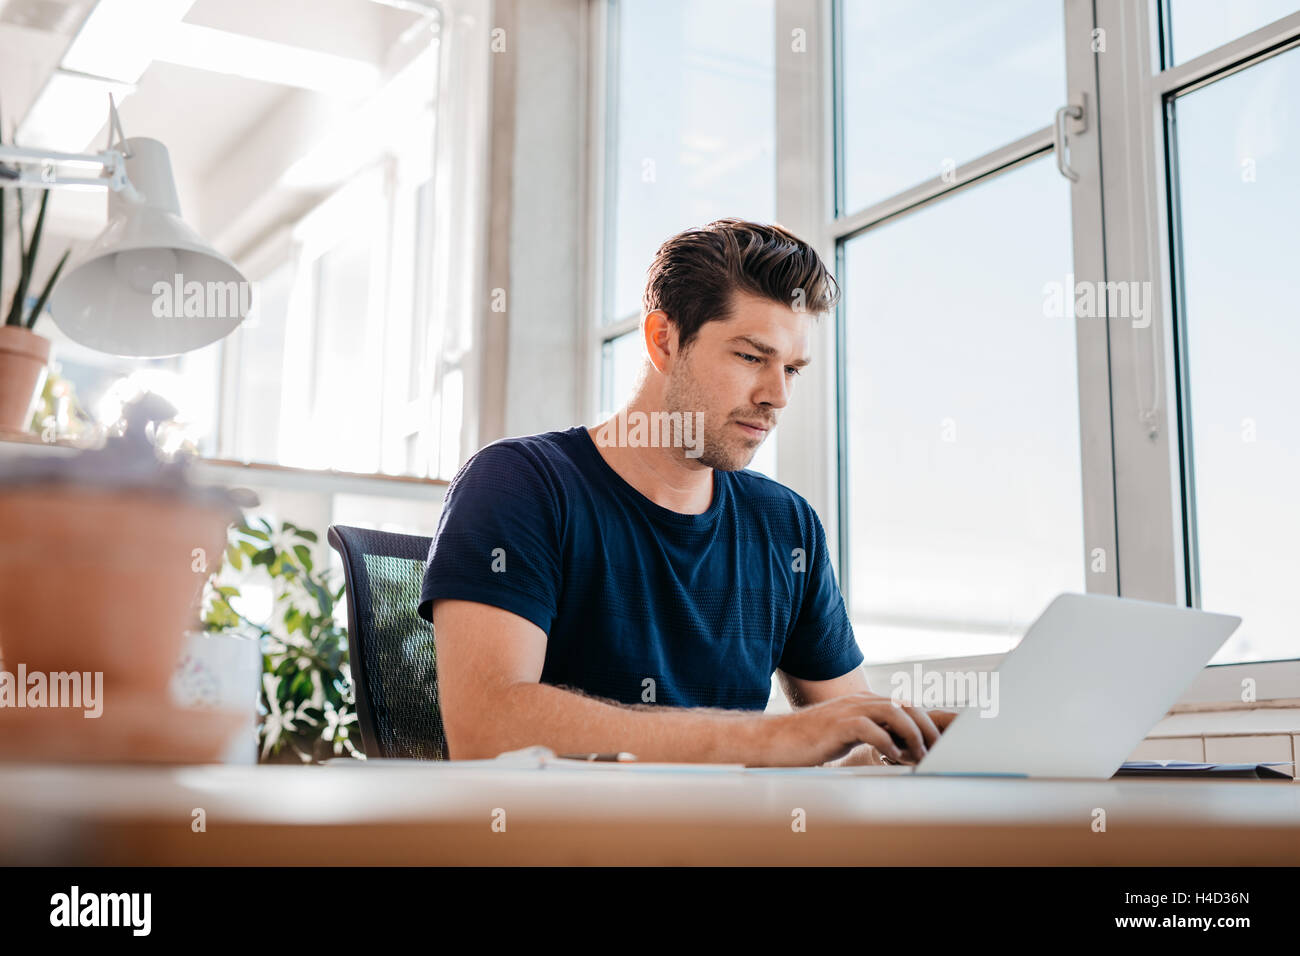 Young male executive working on laptop at his desk. Young businessman using laptop computer at work. Stock Photo